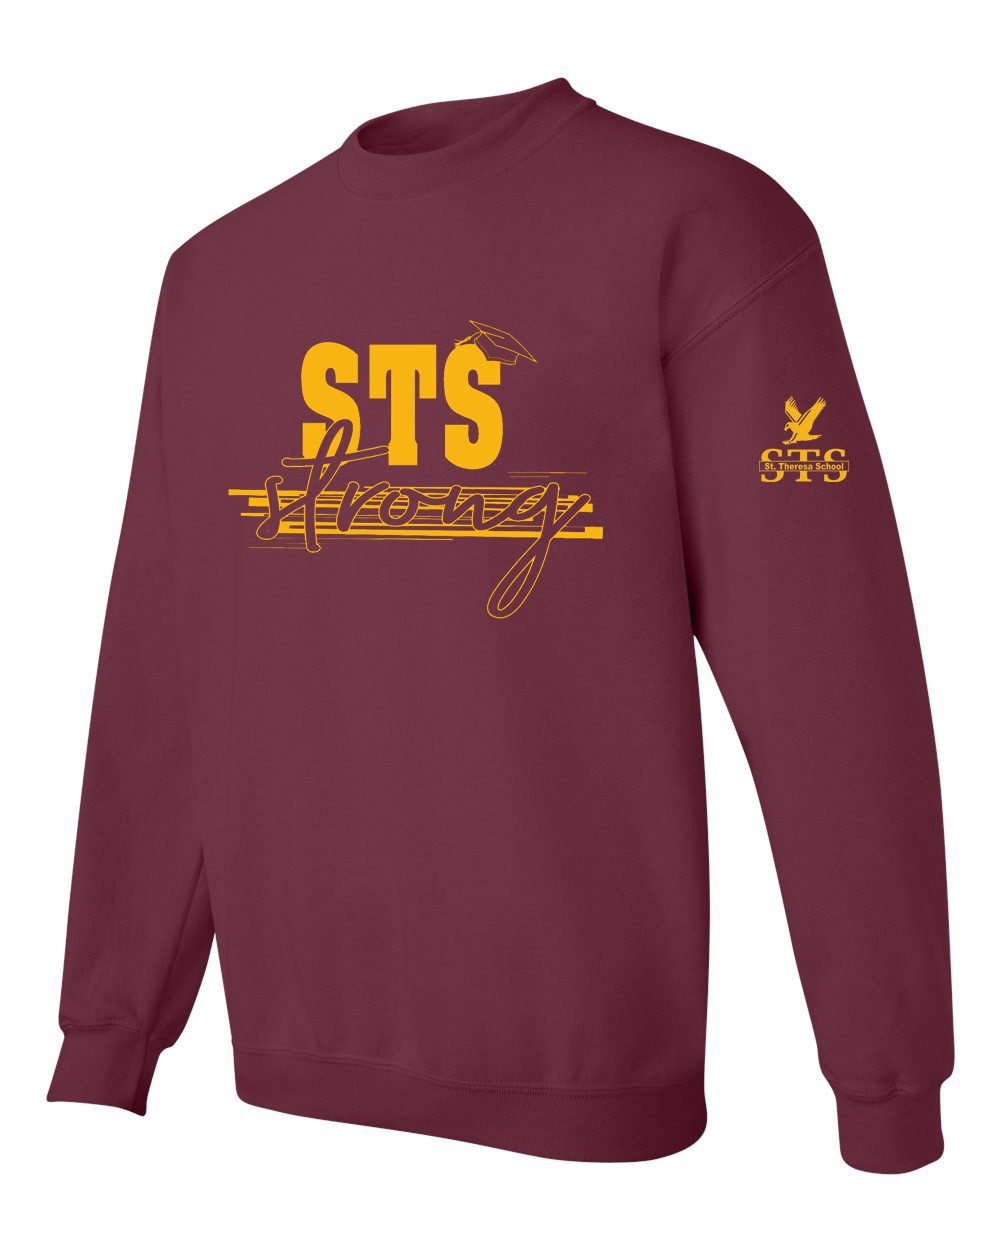 STS Staff L/S Strong Spirit T-Shirt w/ Gold Logo - Please Allow 2-3 Weeks for Delivery